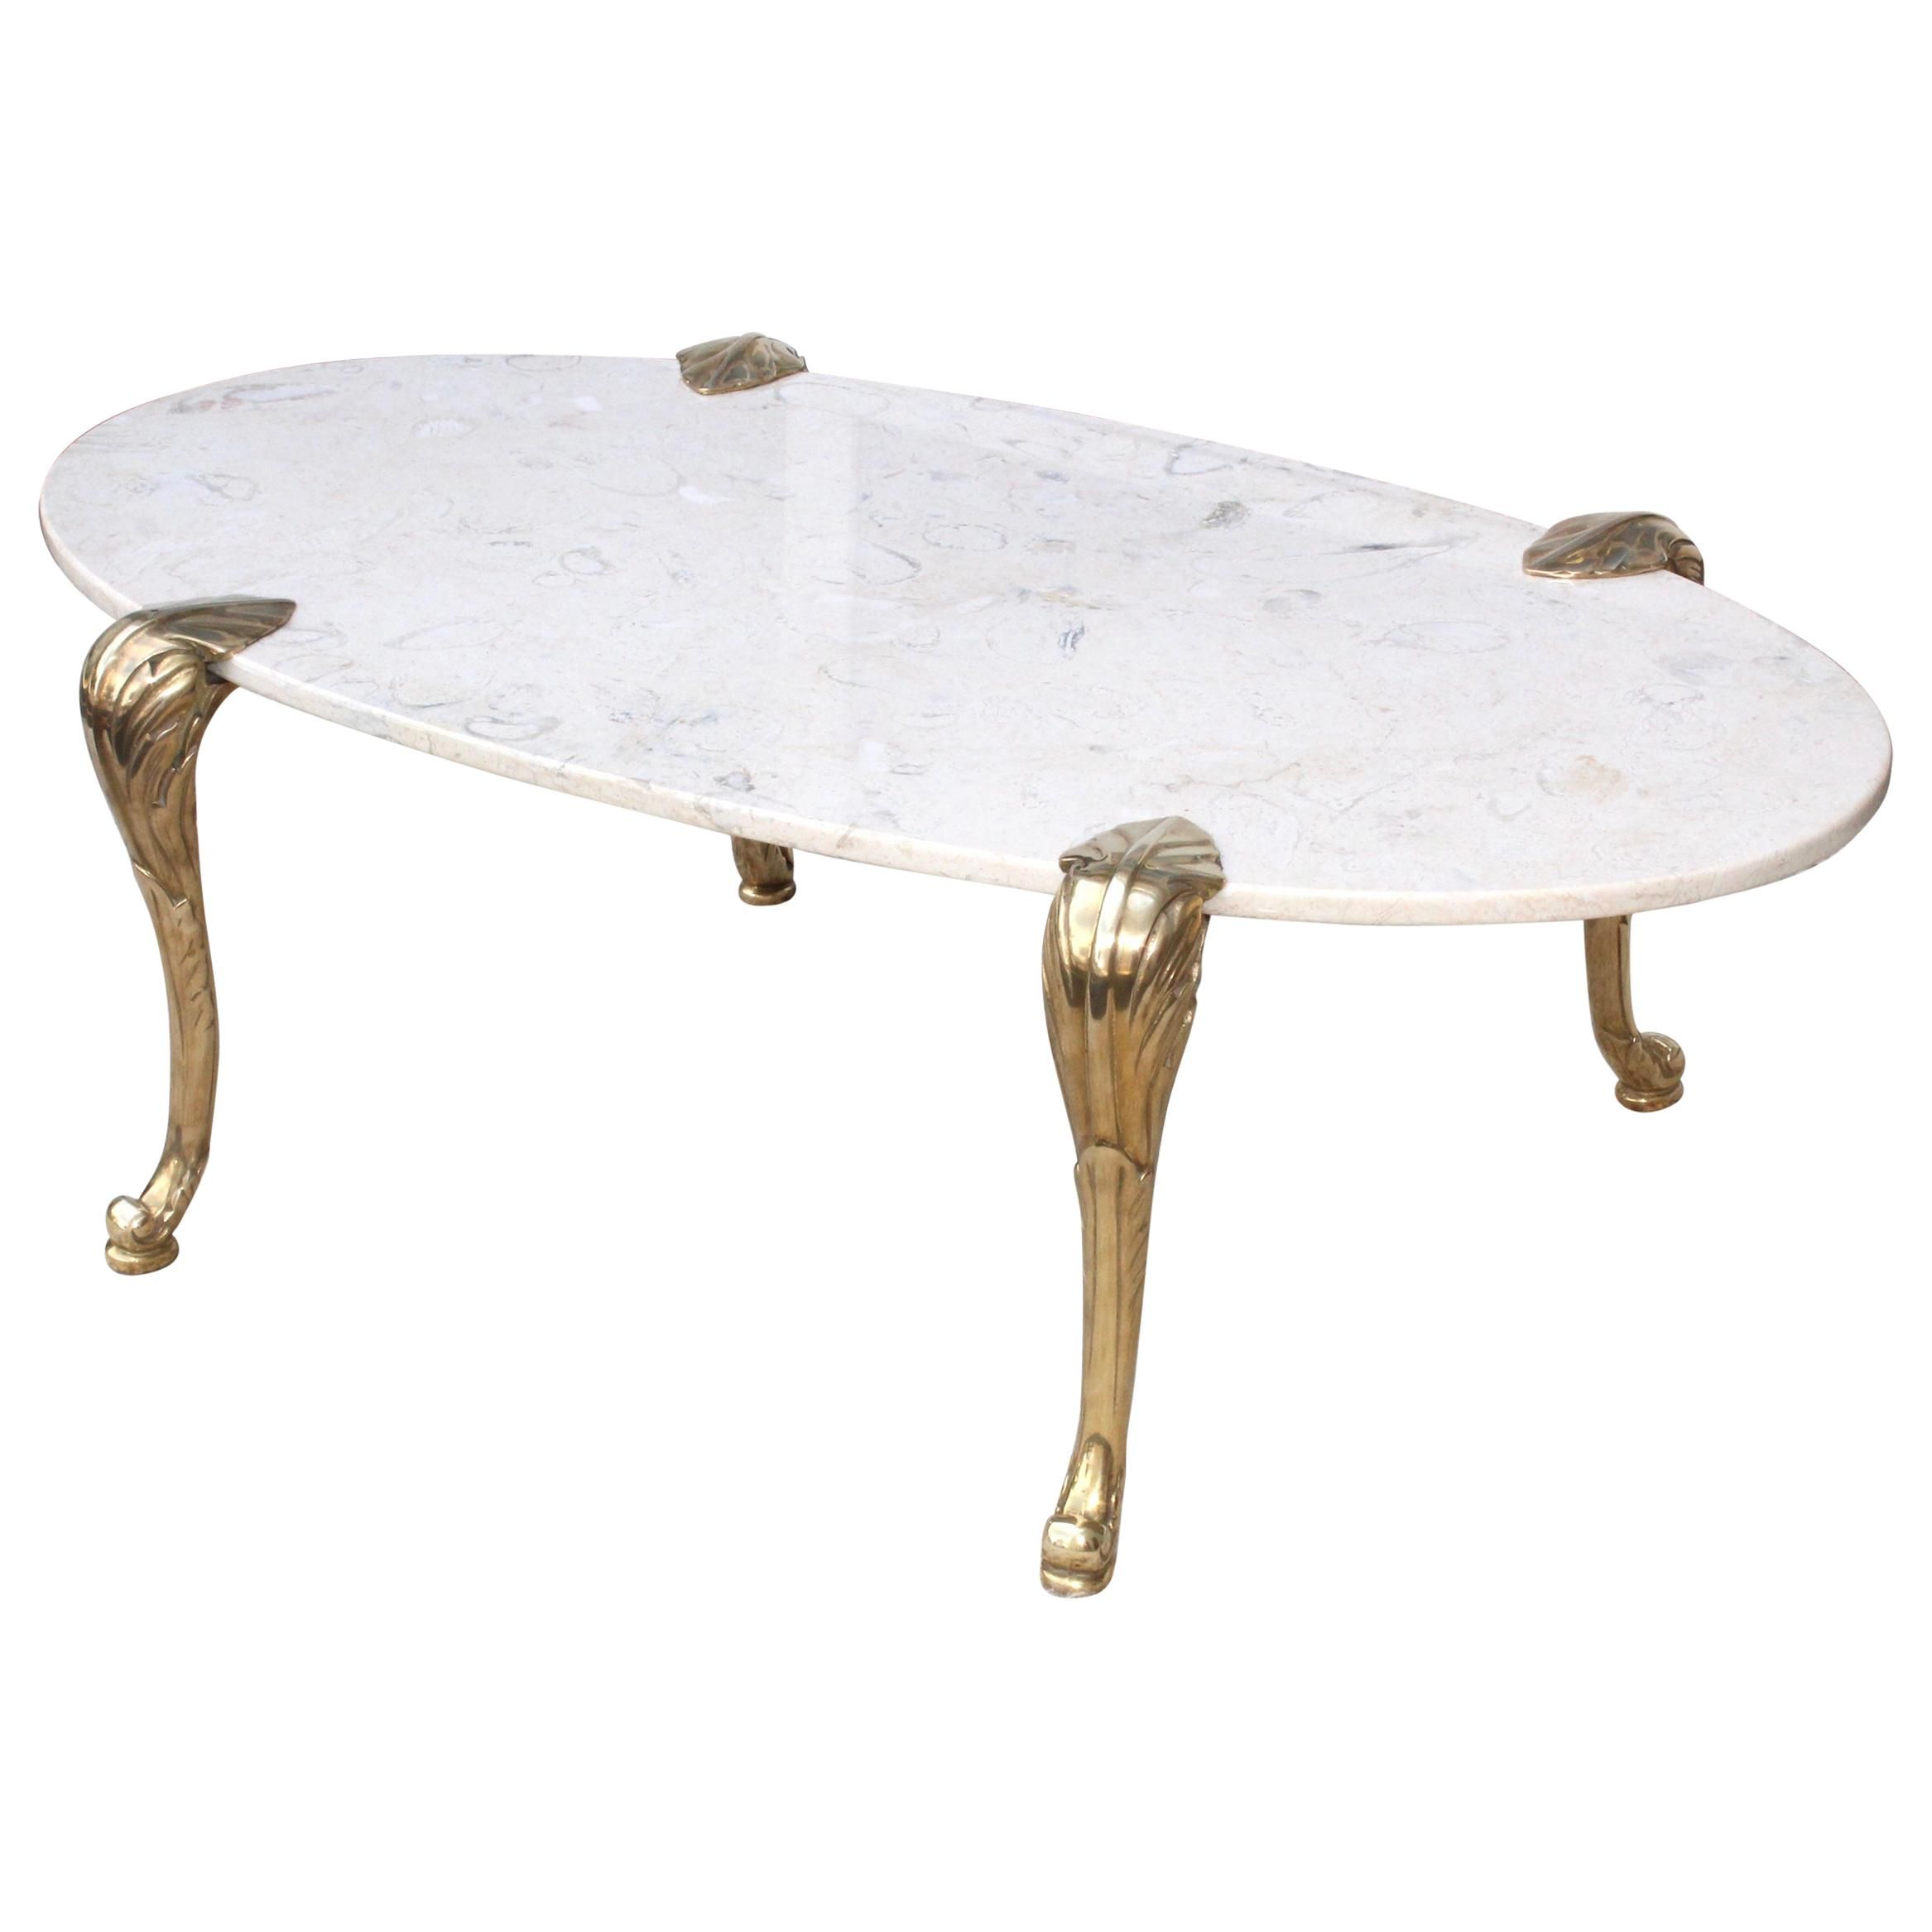 1970S Marble And Brass Coffee Table Attributed To Chapman Regarding Recent Chapman Round Marble Dining Tables (View 7 of 25)